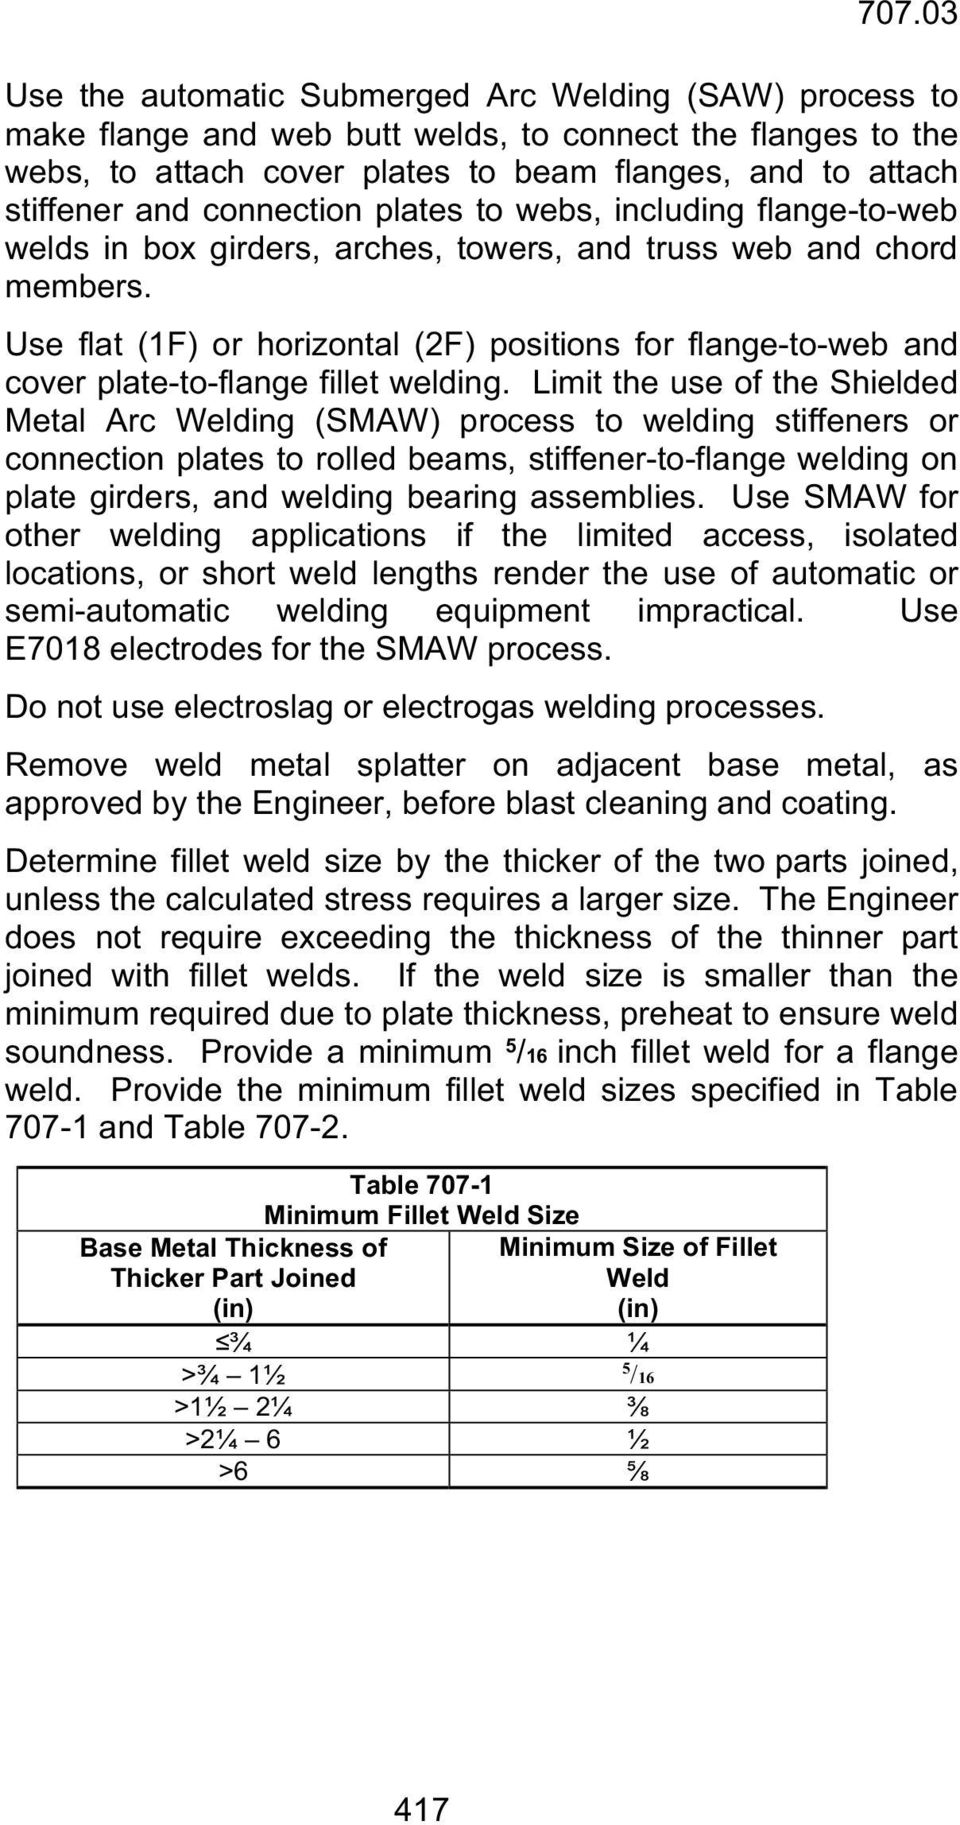 Use flat (1F) or horizontal (2F) positions for flange-to-web and cover plate-to-flange fillet welding.